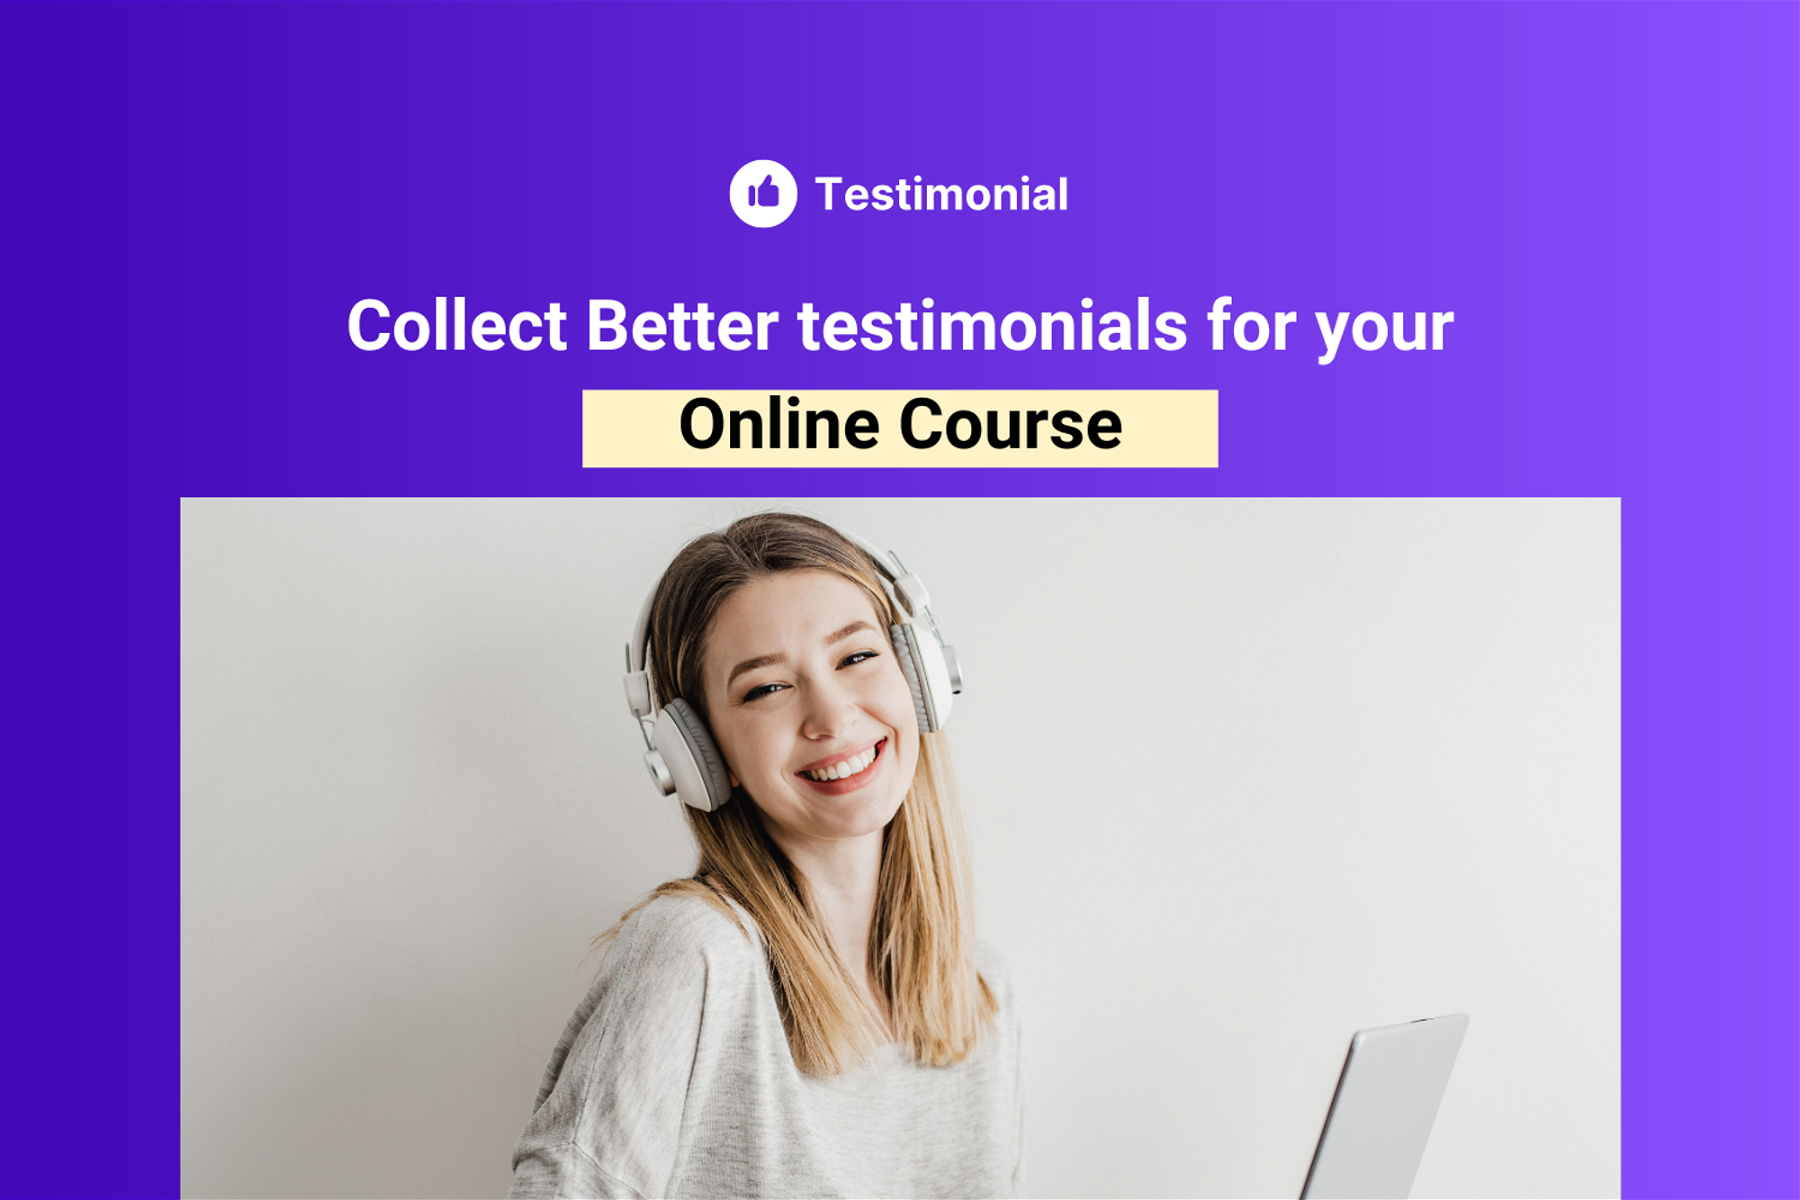 How To Collect More and Better Testimonials for Your Online Course